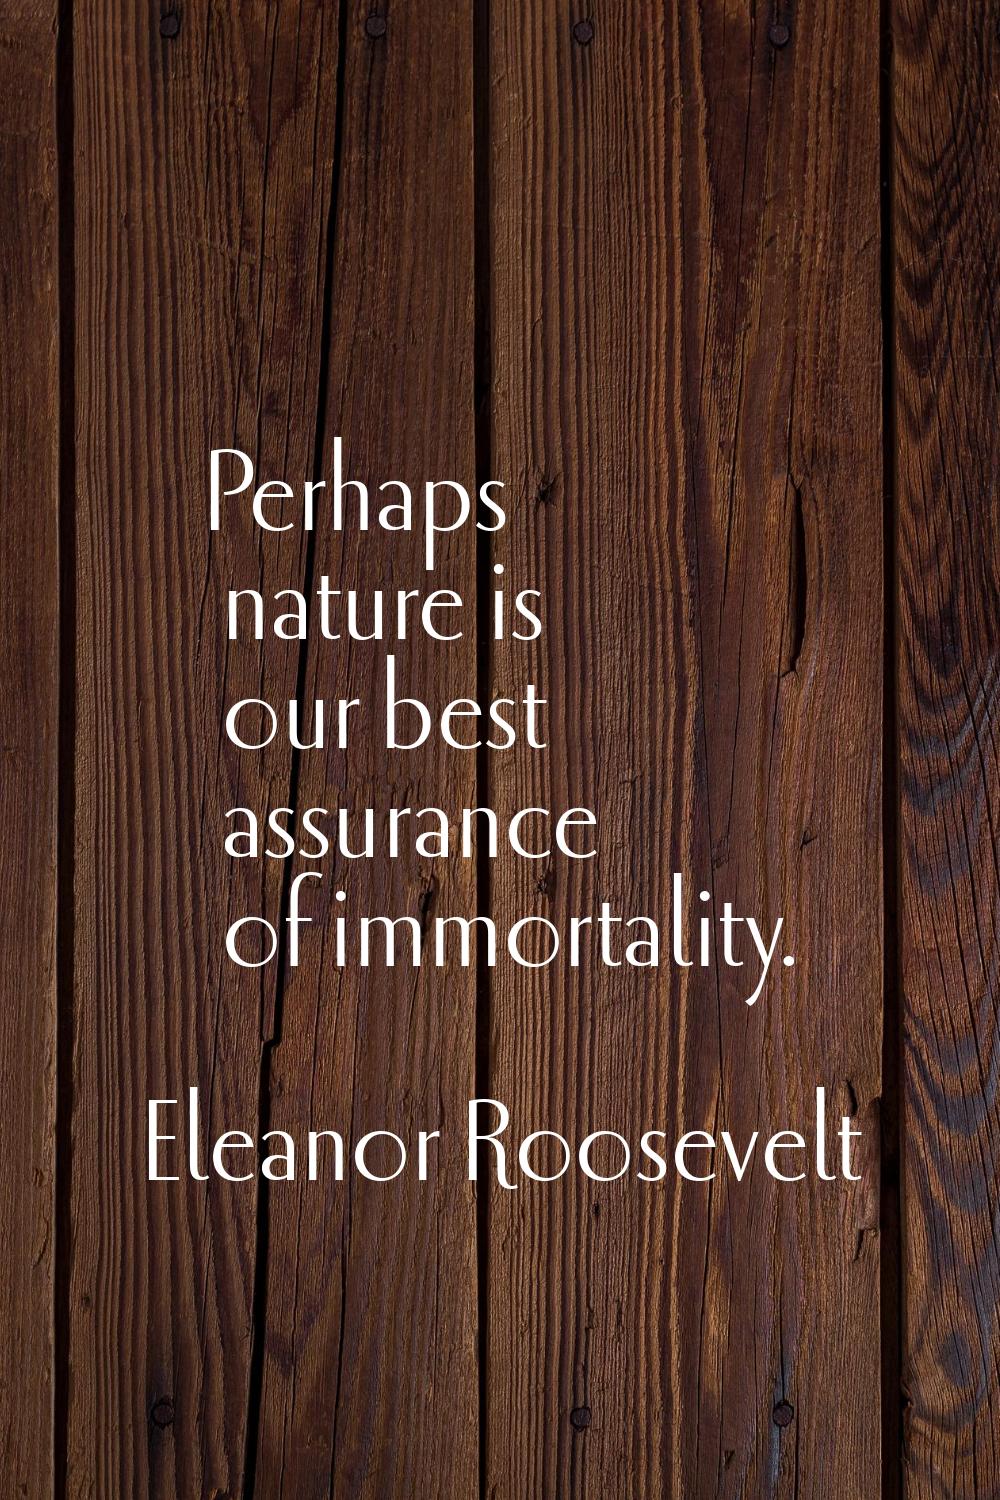 Perhaps nature is our best assurance of immortality.